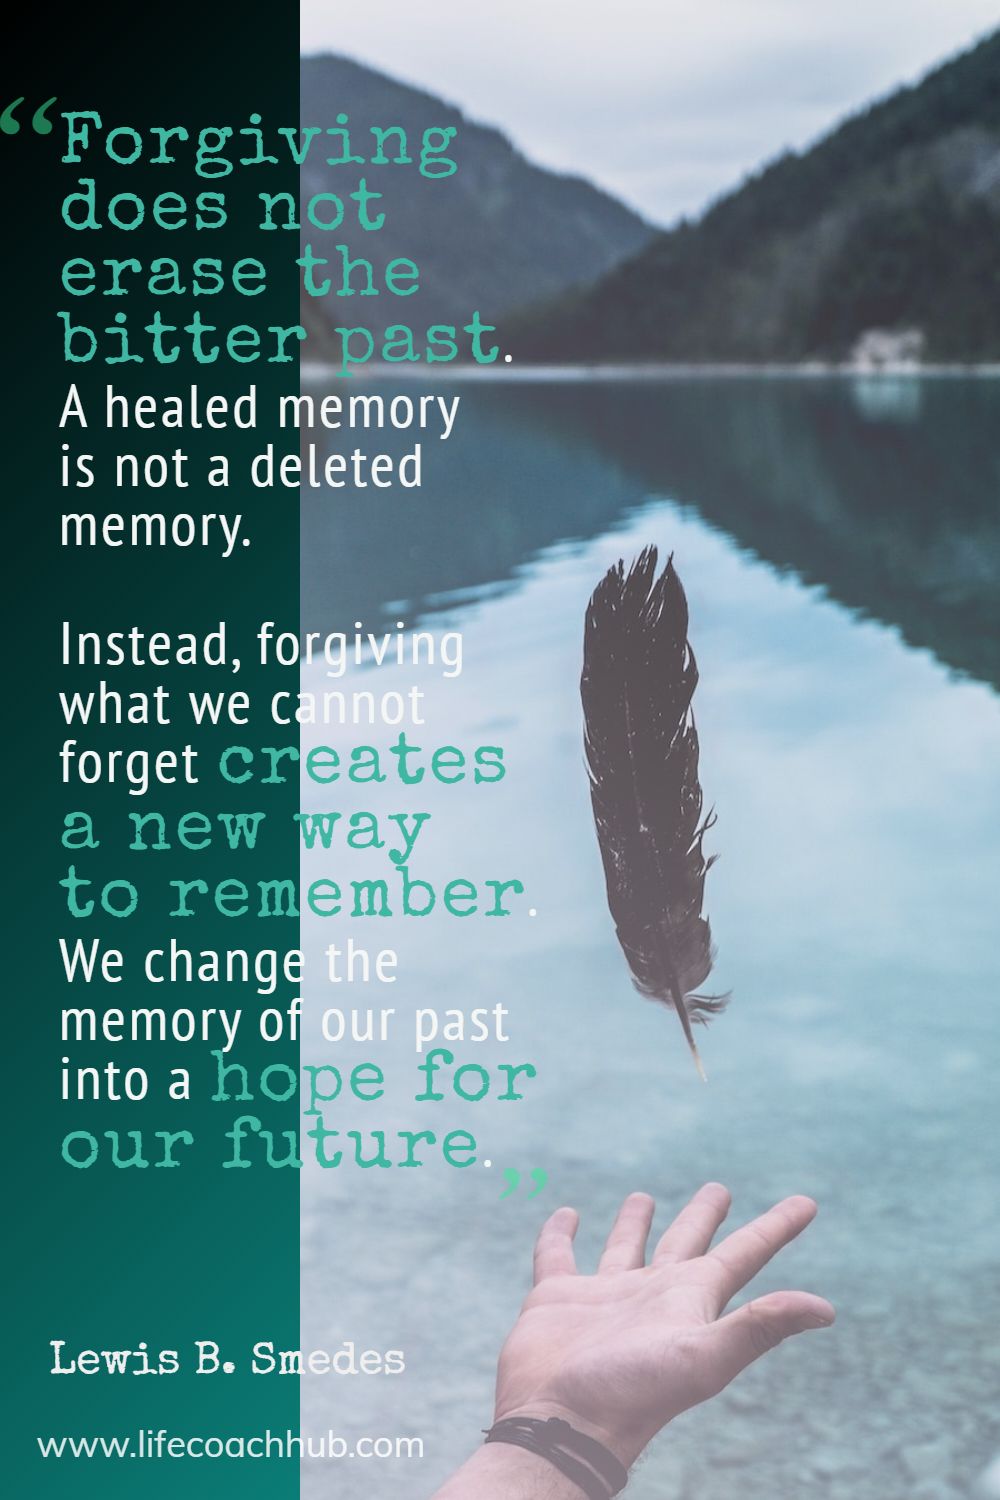 Forgiving does not erase the bitter past. A healed memory is not a deleted memory. Instead, forgiving what we cannot forget creates a new way to remember. We change the memory of our past into a hope for our future. Lewis B. Smedes Coaching Quote